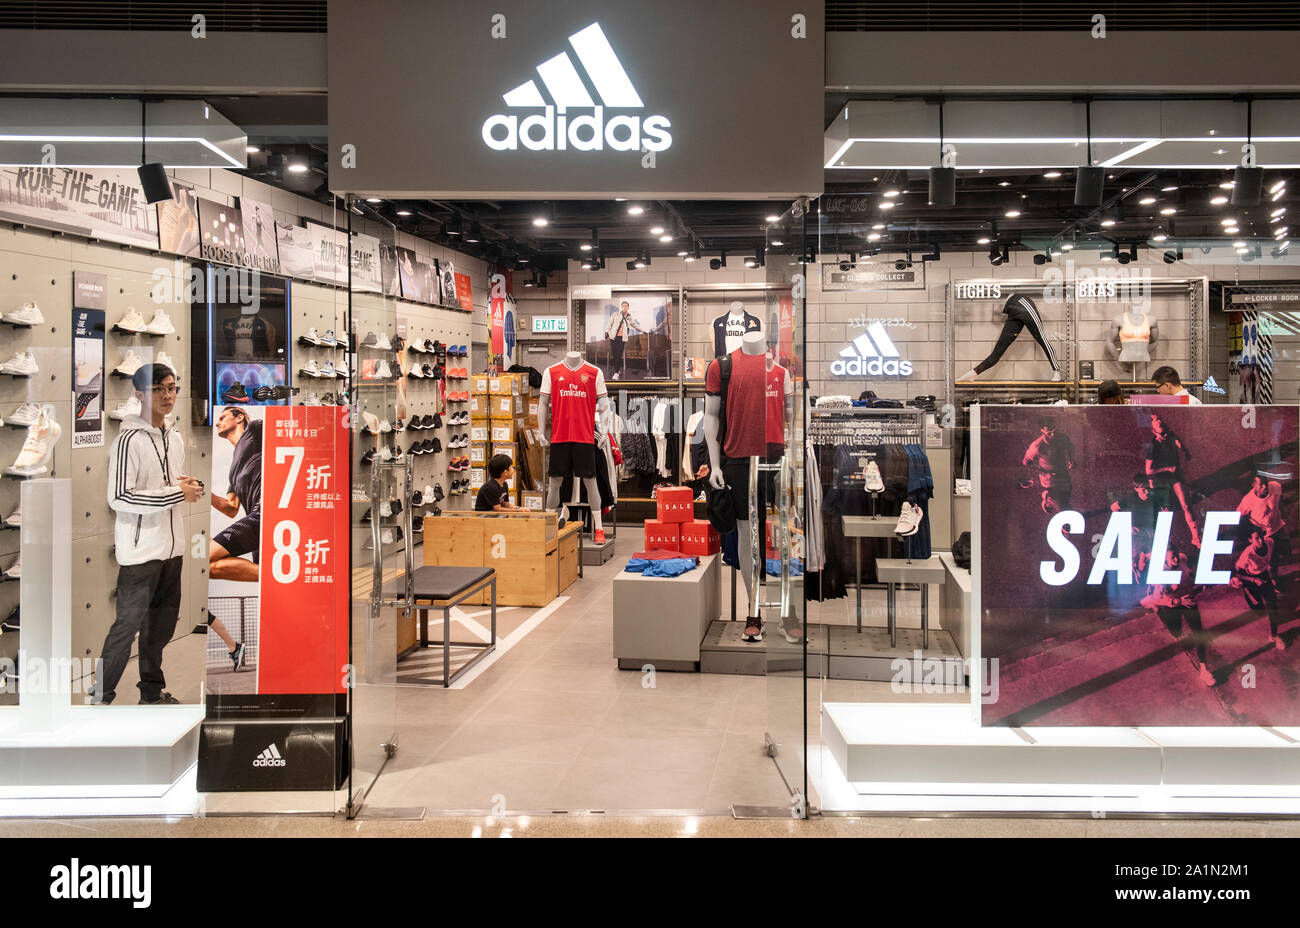 adidas outlets sales